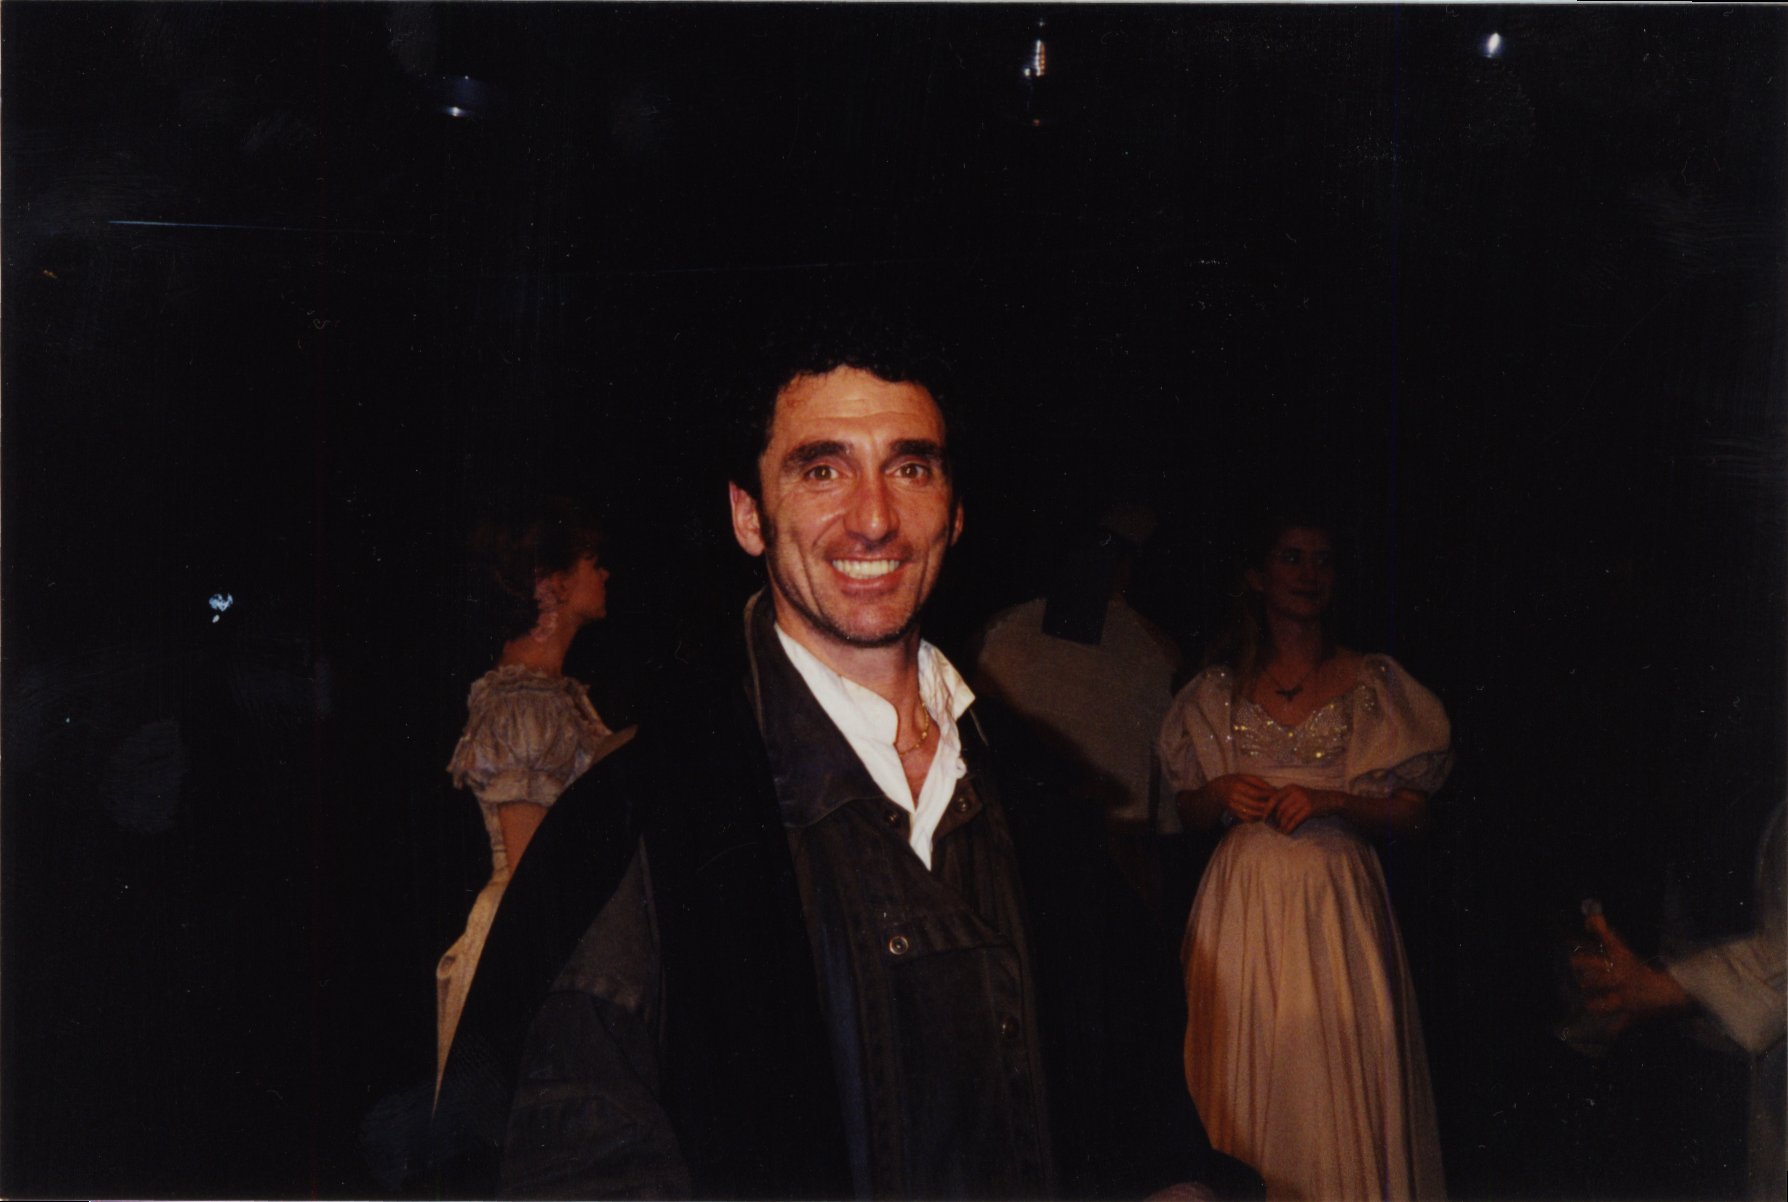 David Copeland after performance, in the role of Uncle Vanya, by Anton Checkov at 42nd Street Workshop Theater, NYC.